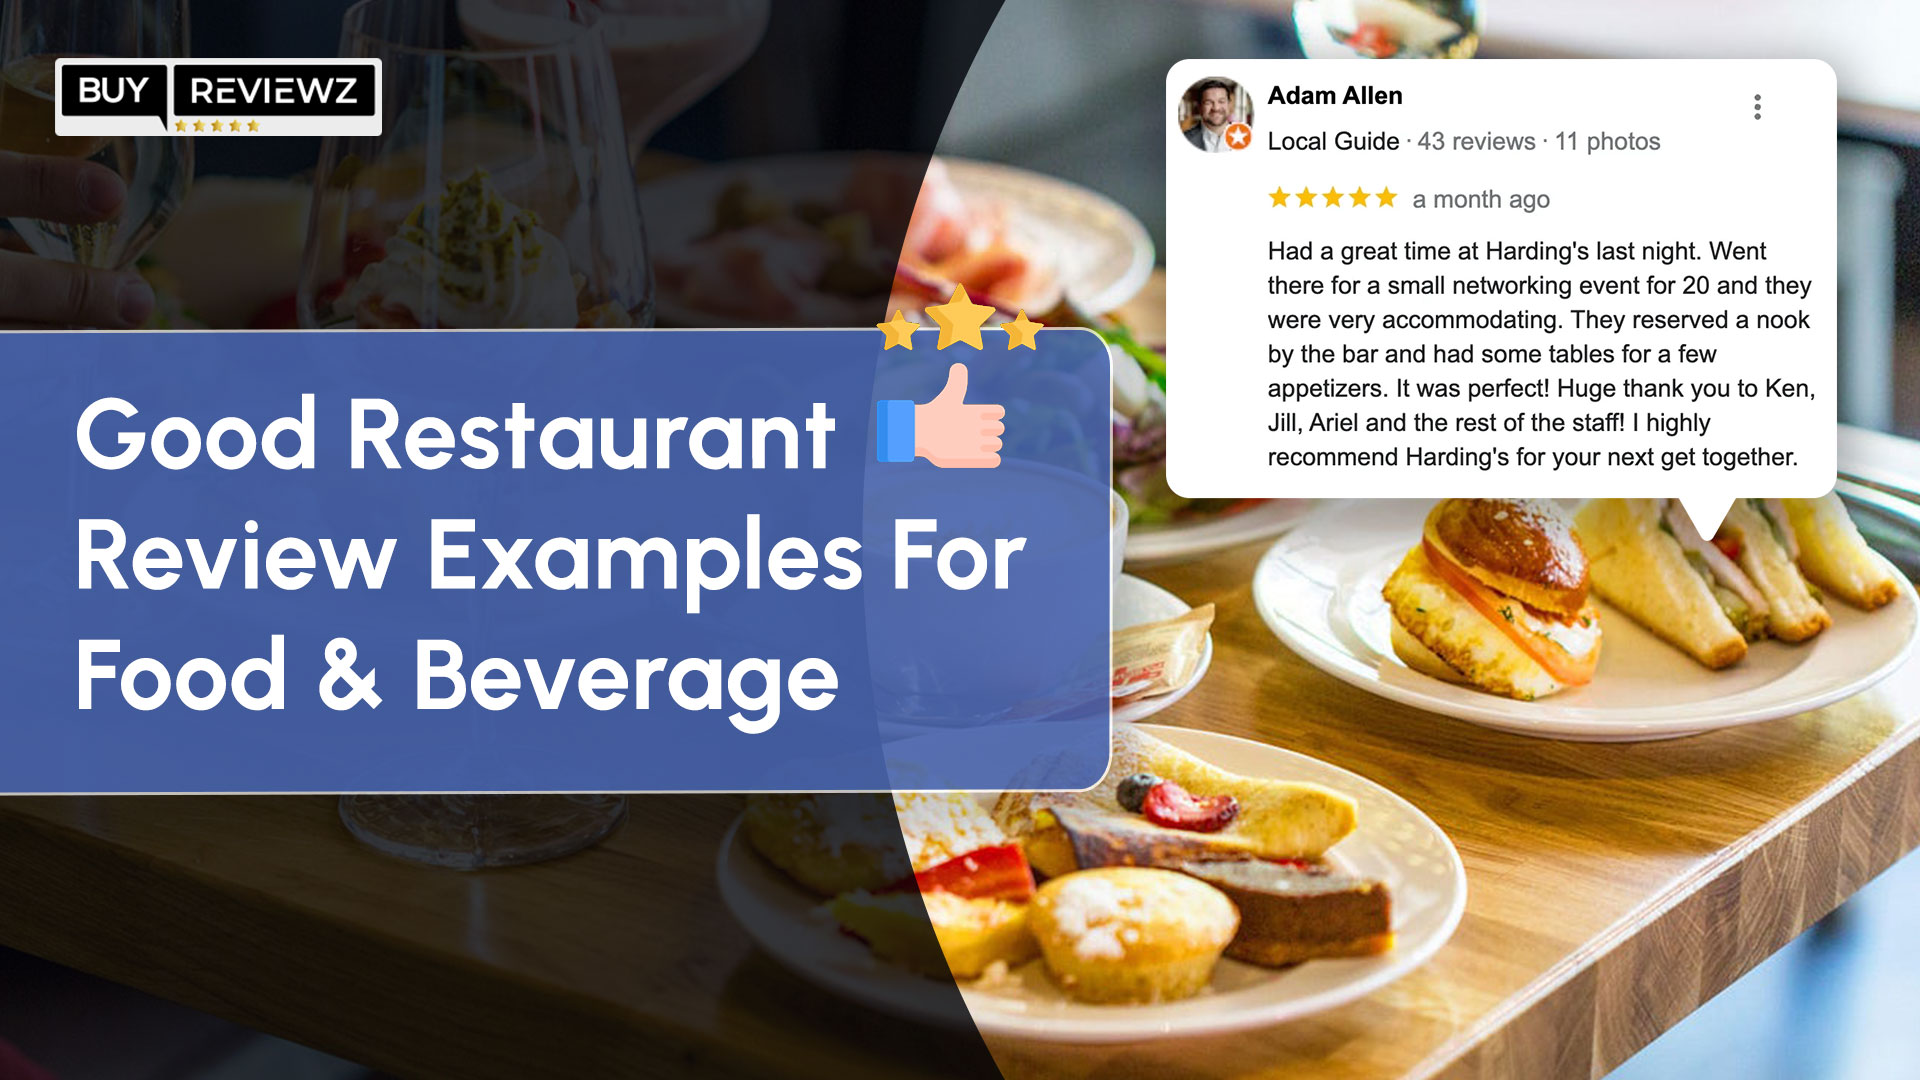 Good Restaurant Review Examples For Food